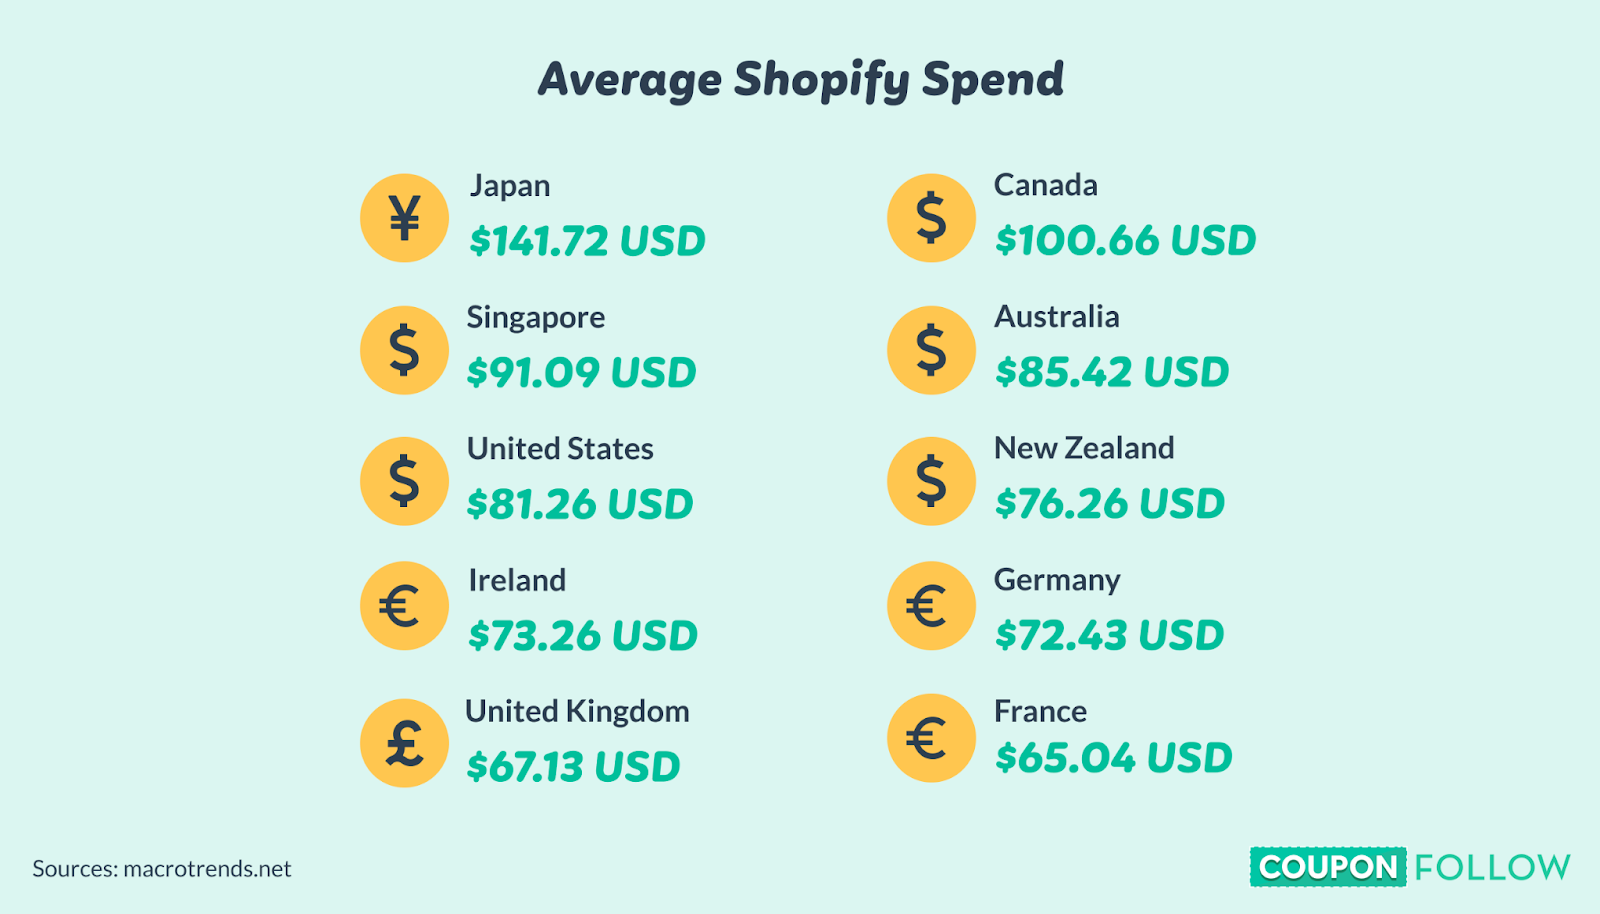 Average Shopify spend by country